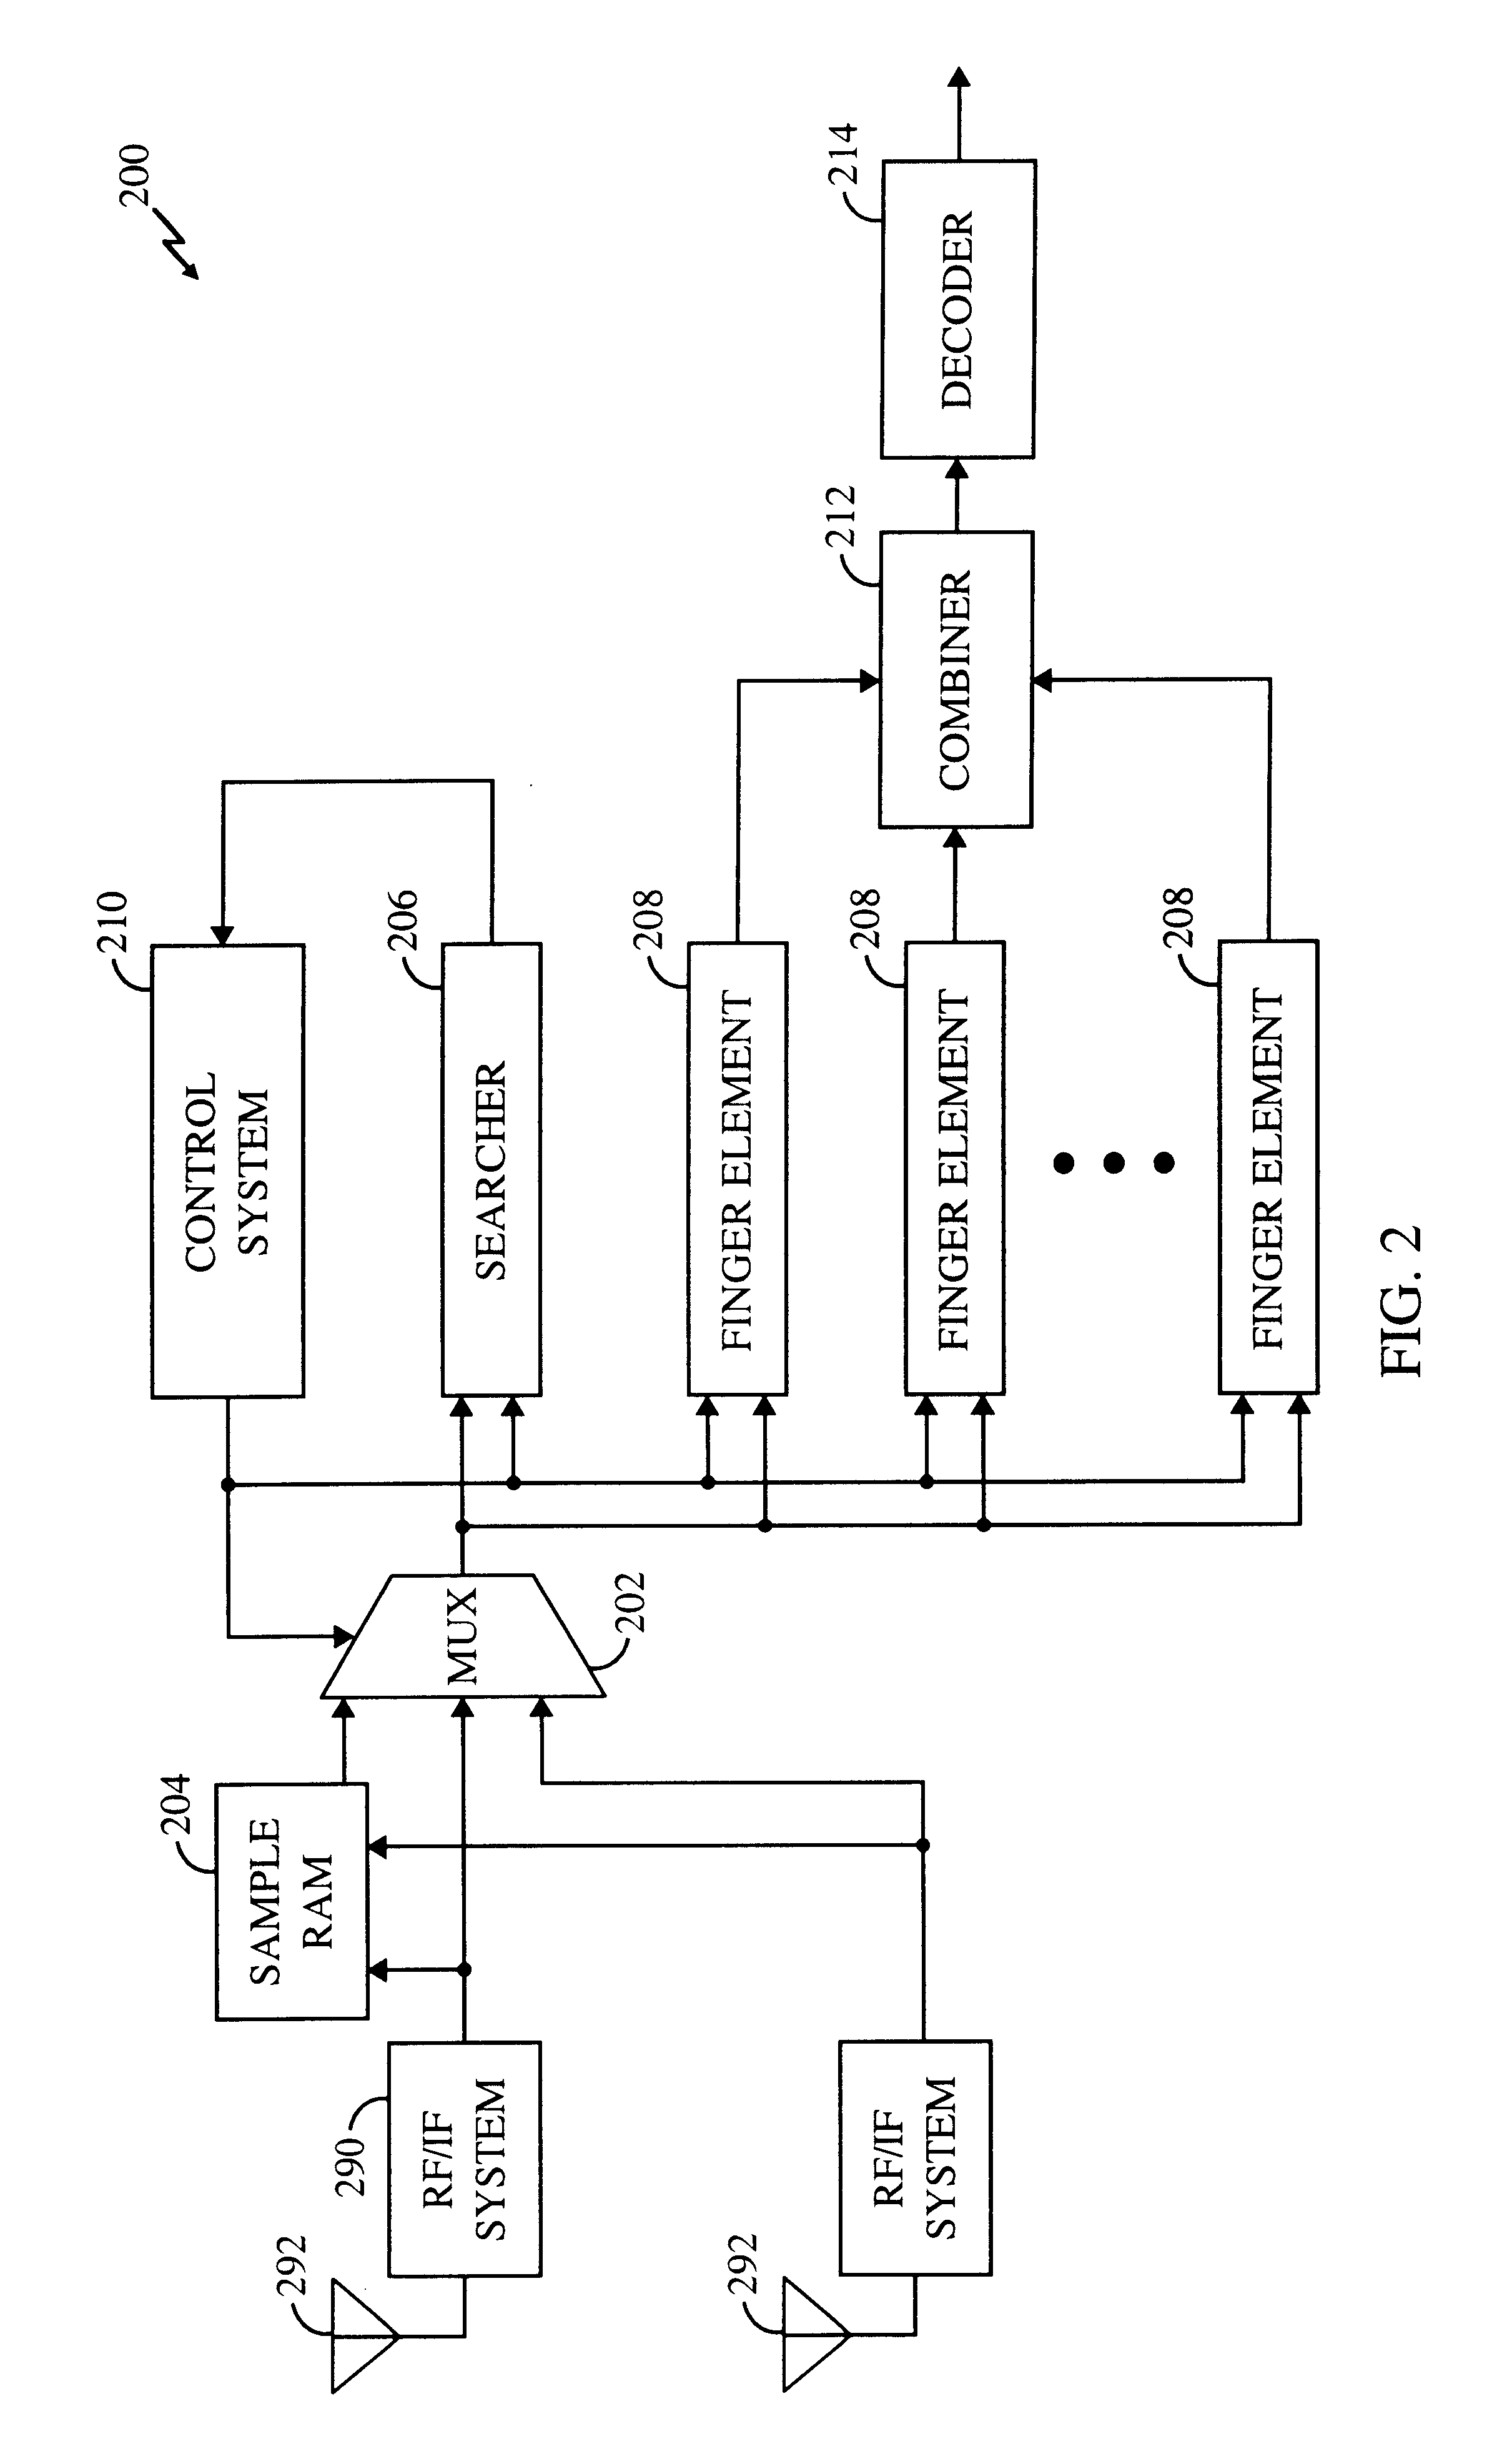 Method and apparatus for adaptive measurement of round-trip time in ARQ protocols and using the same for controlling flow of data in a communication system